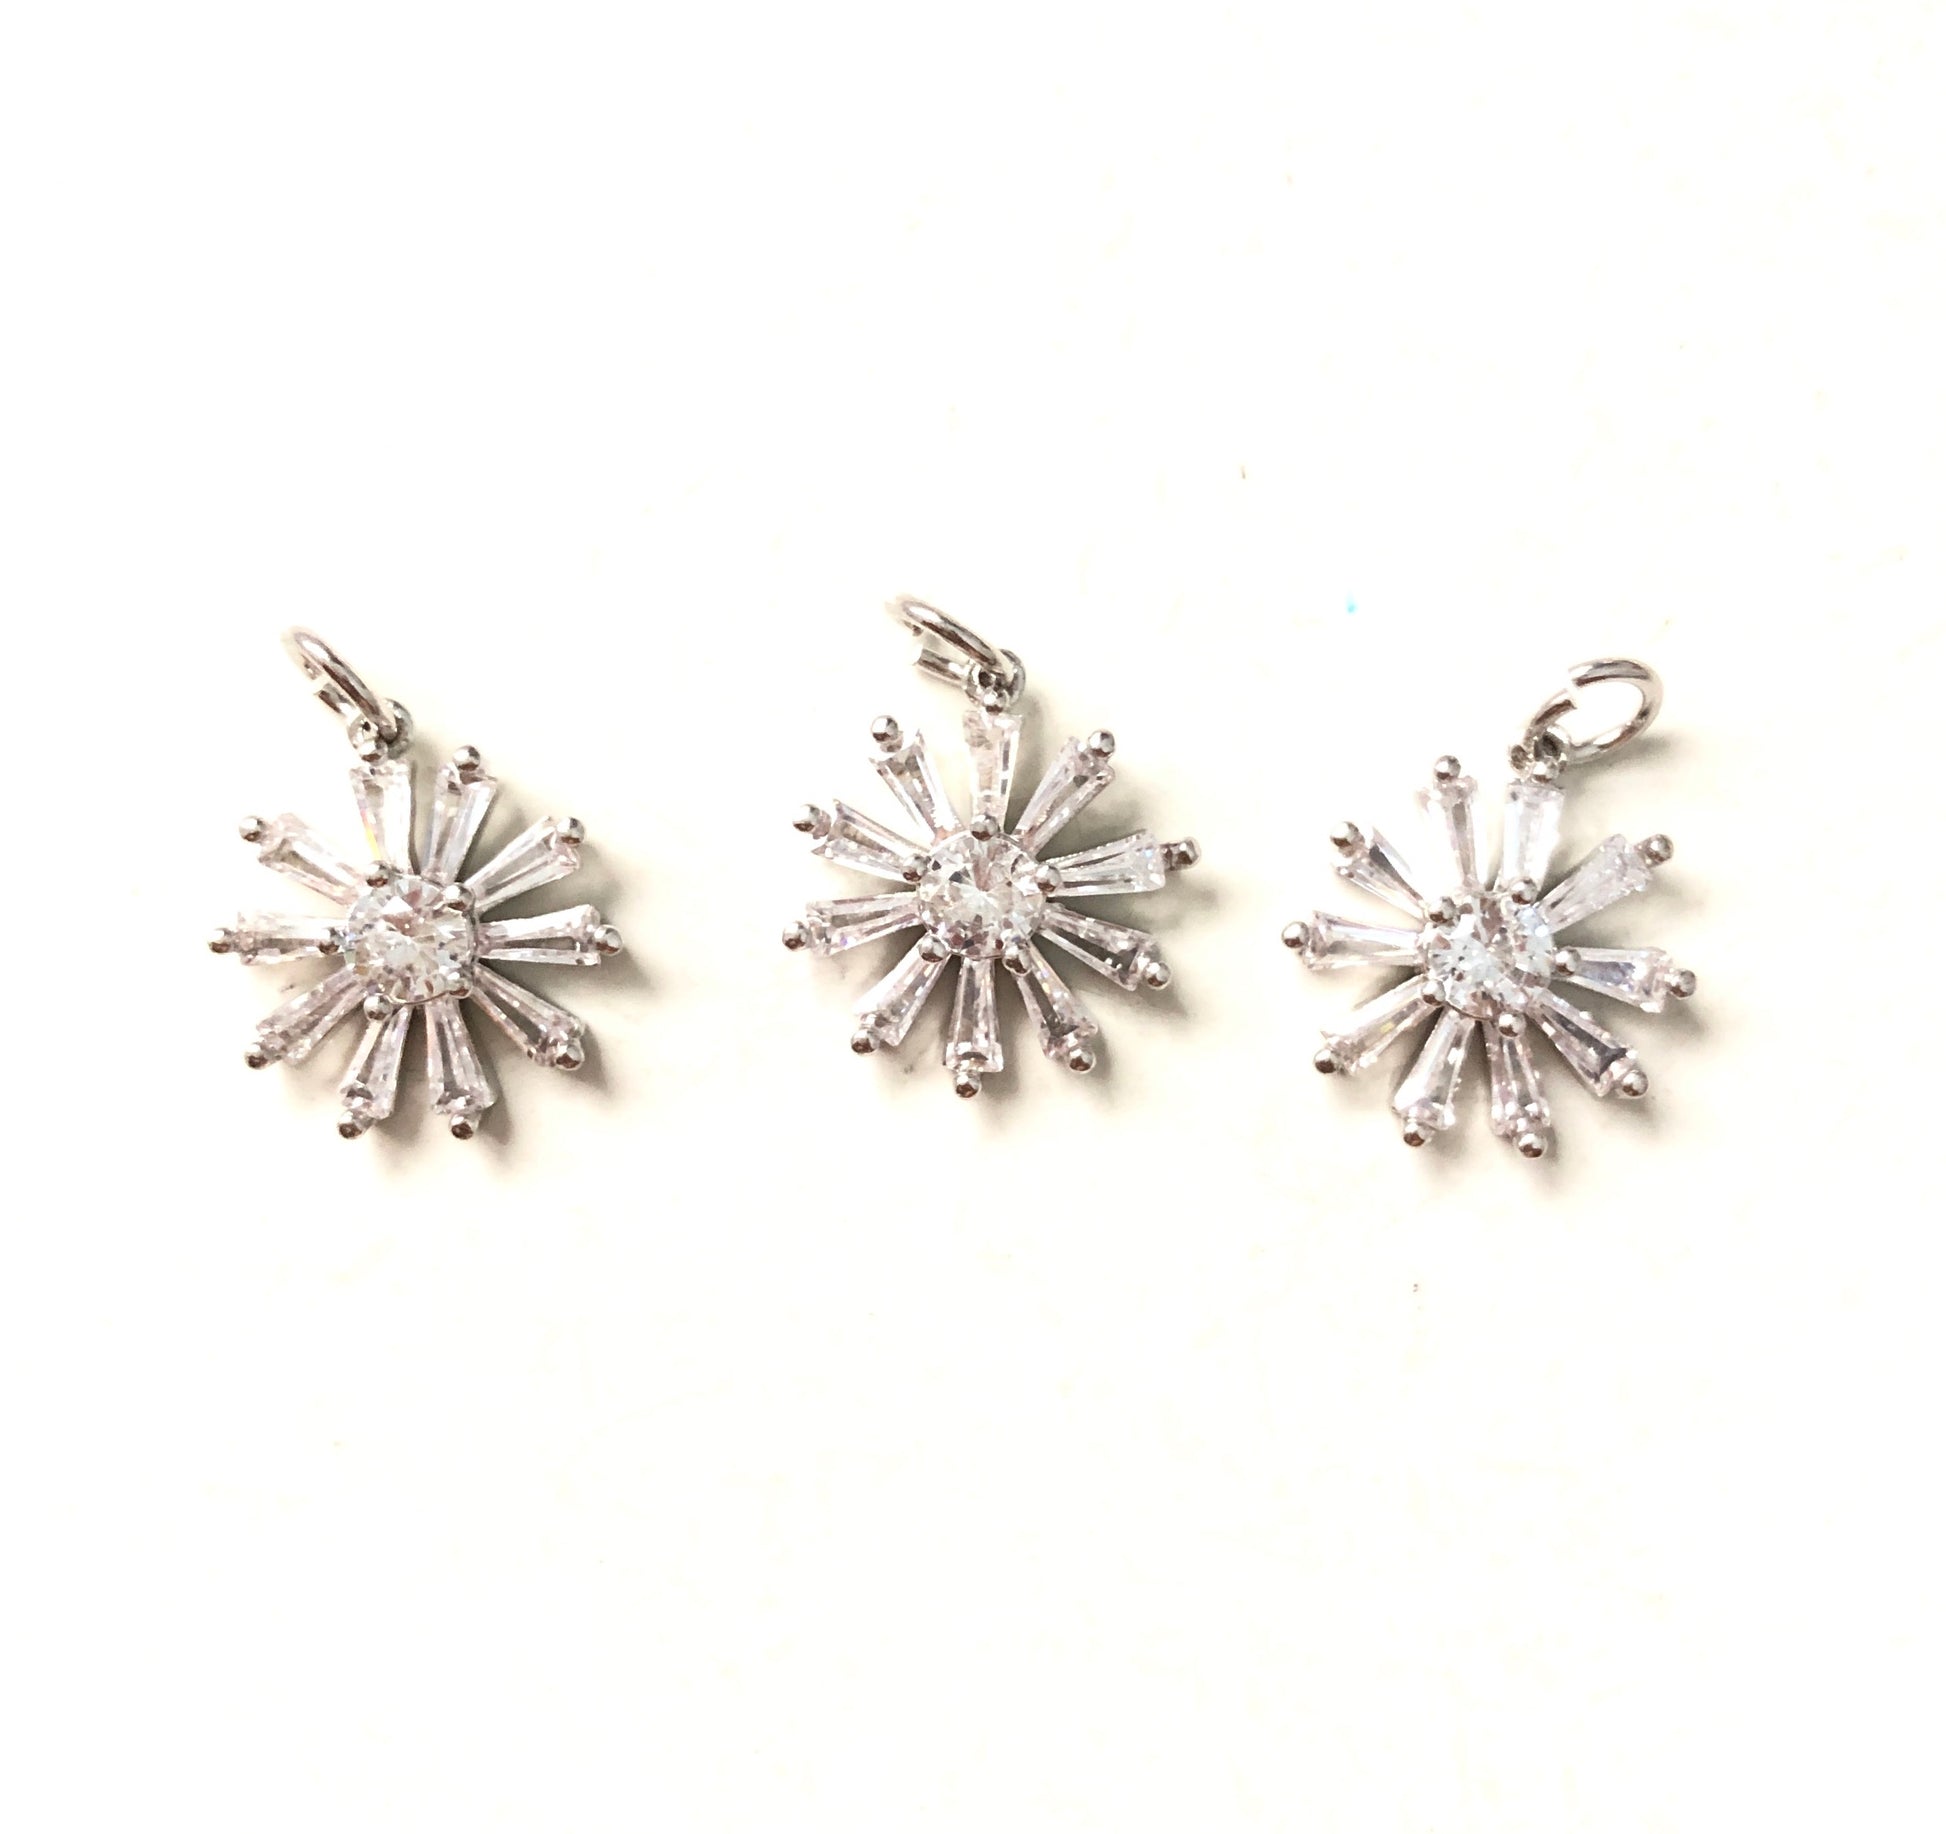 10pcs/lot 13mm CZ Paved Flower Charms Silver CZ Paved Charms Flowers Small Sizes Charms Beads Beyond